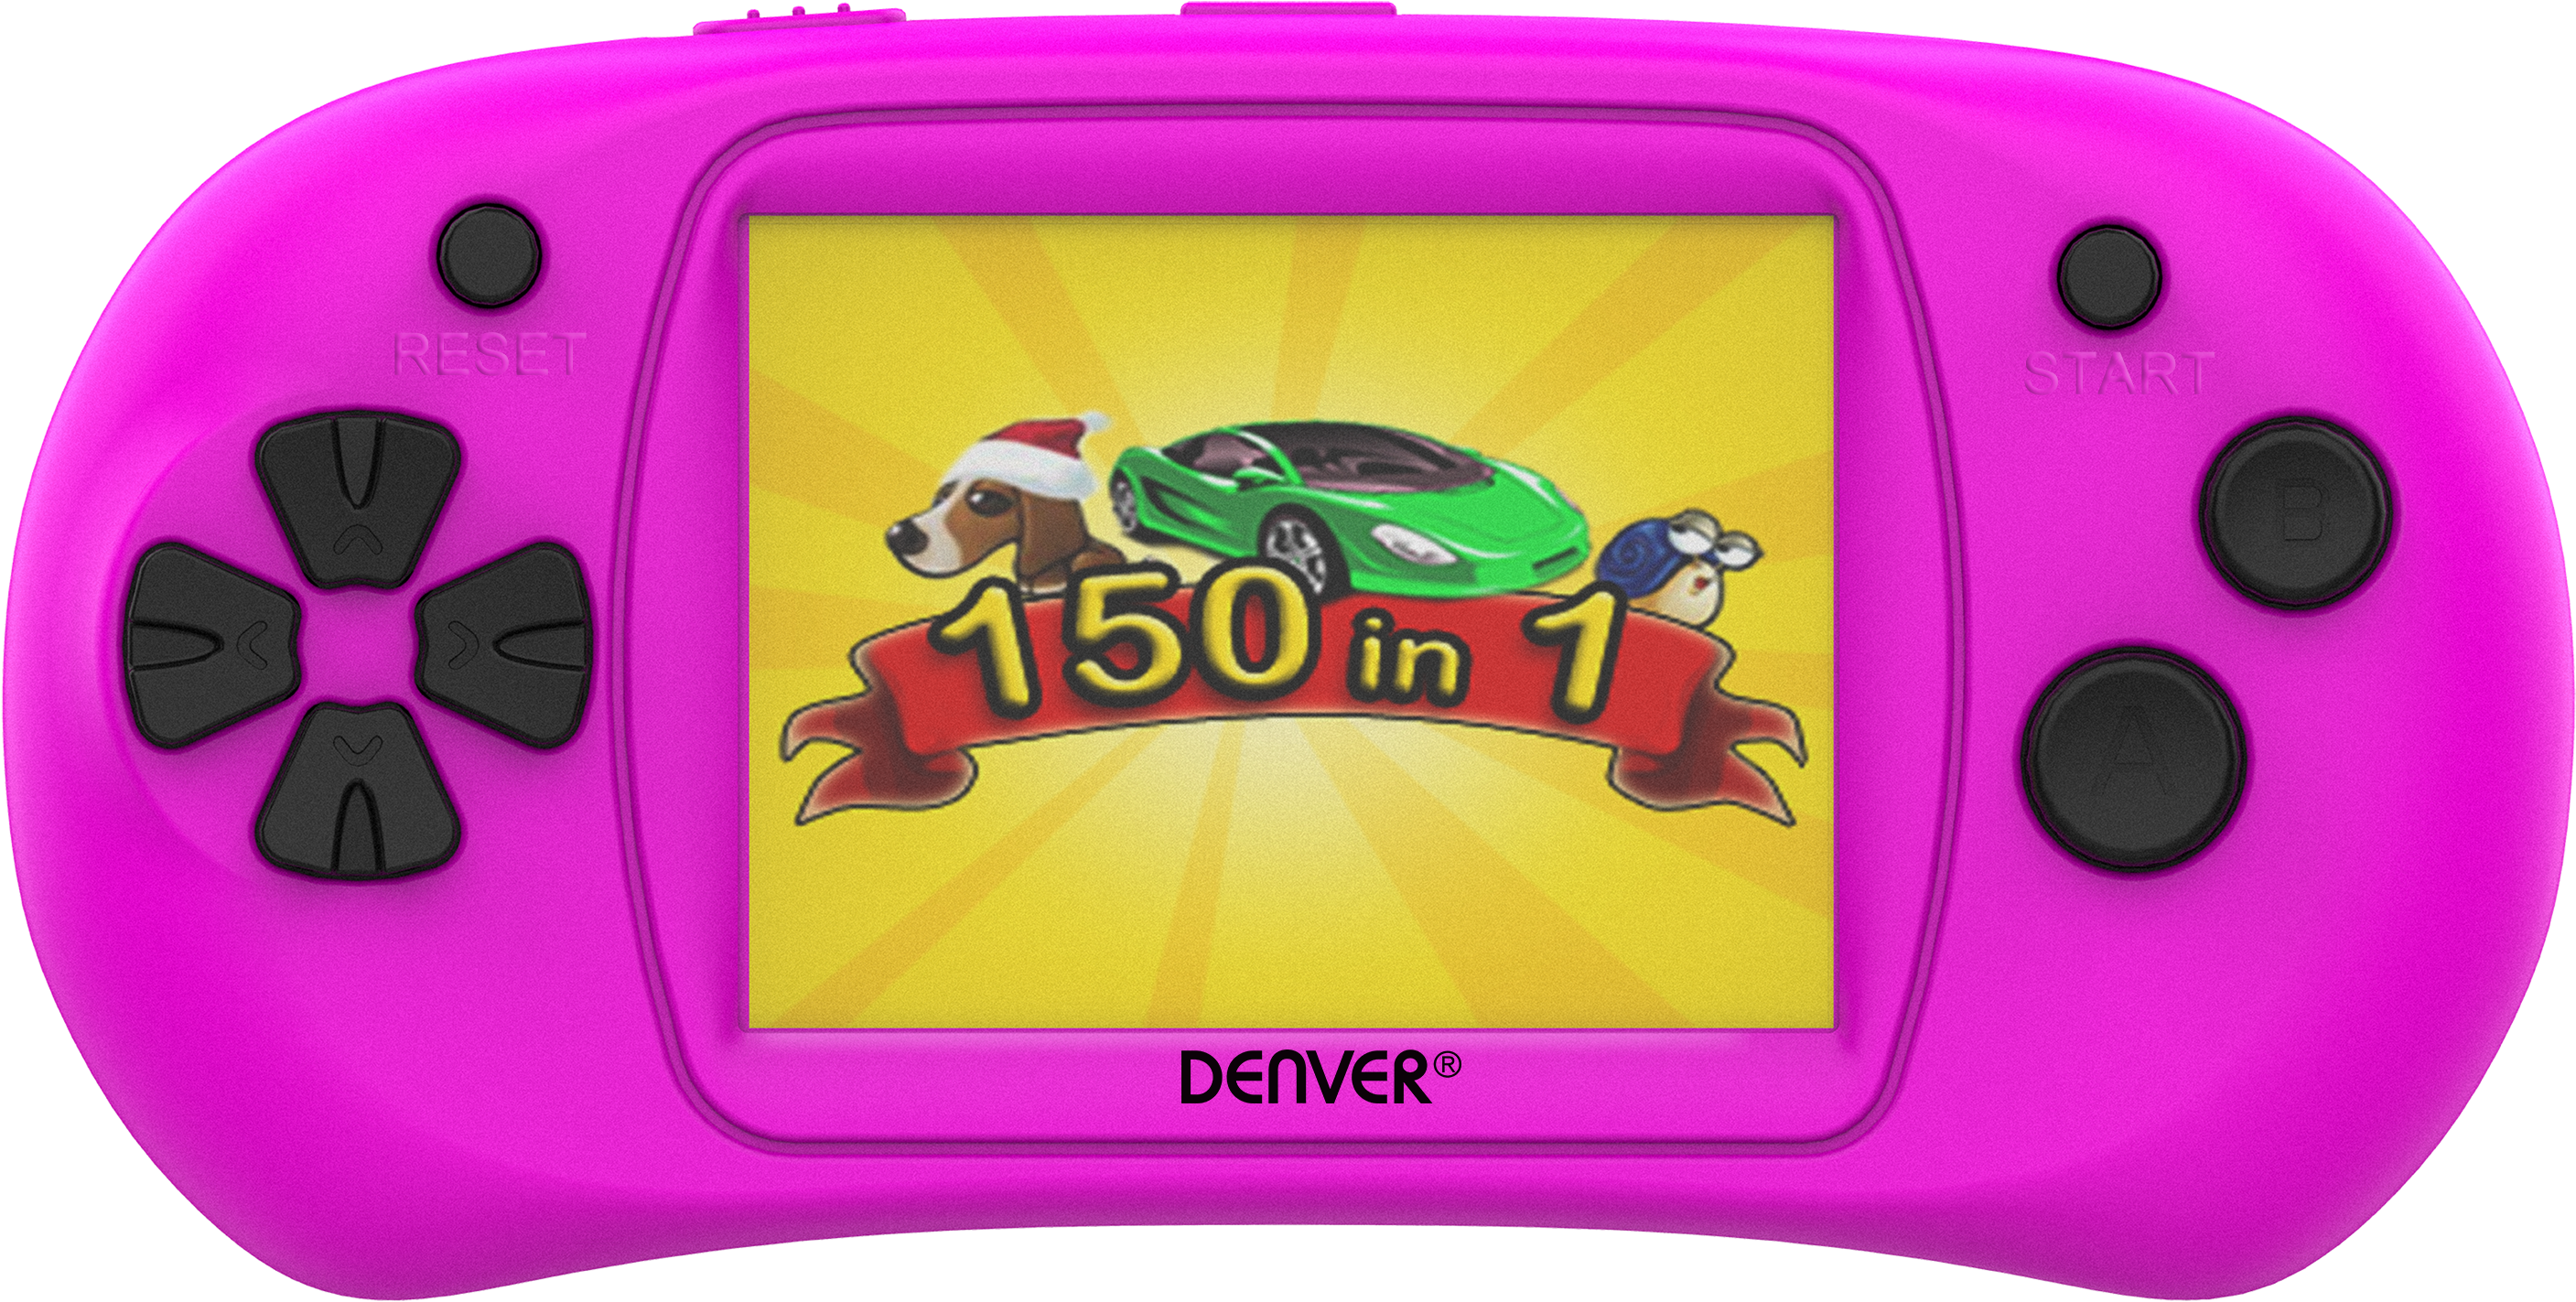 Denver150in1 Handheld Game Console Pink